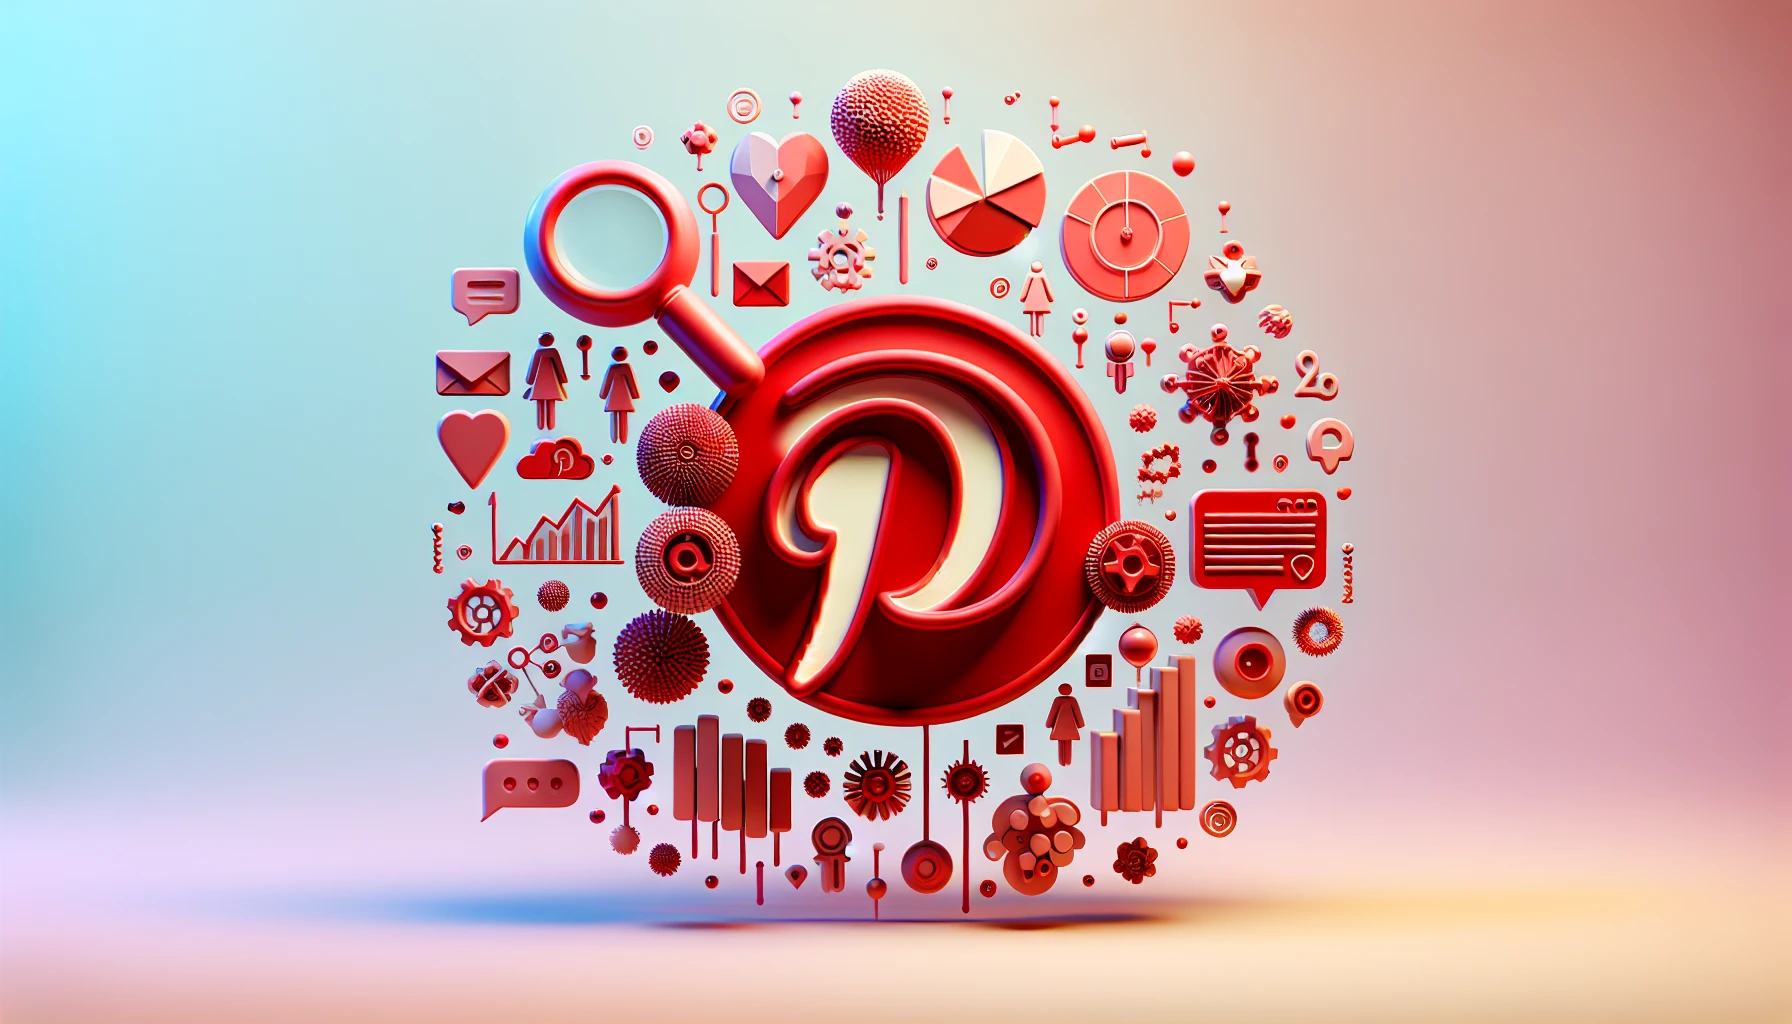 Pinterest logo and affiliate marketing text